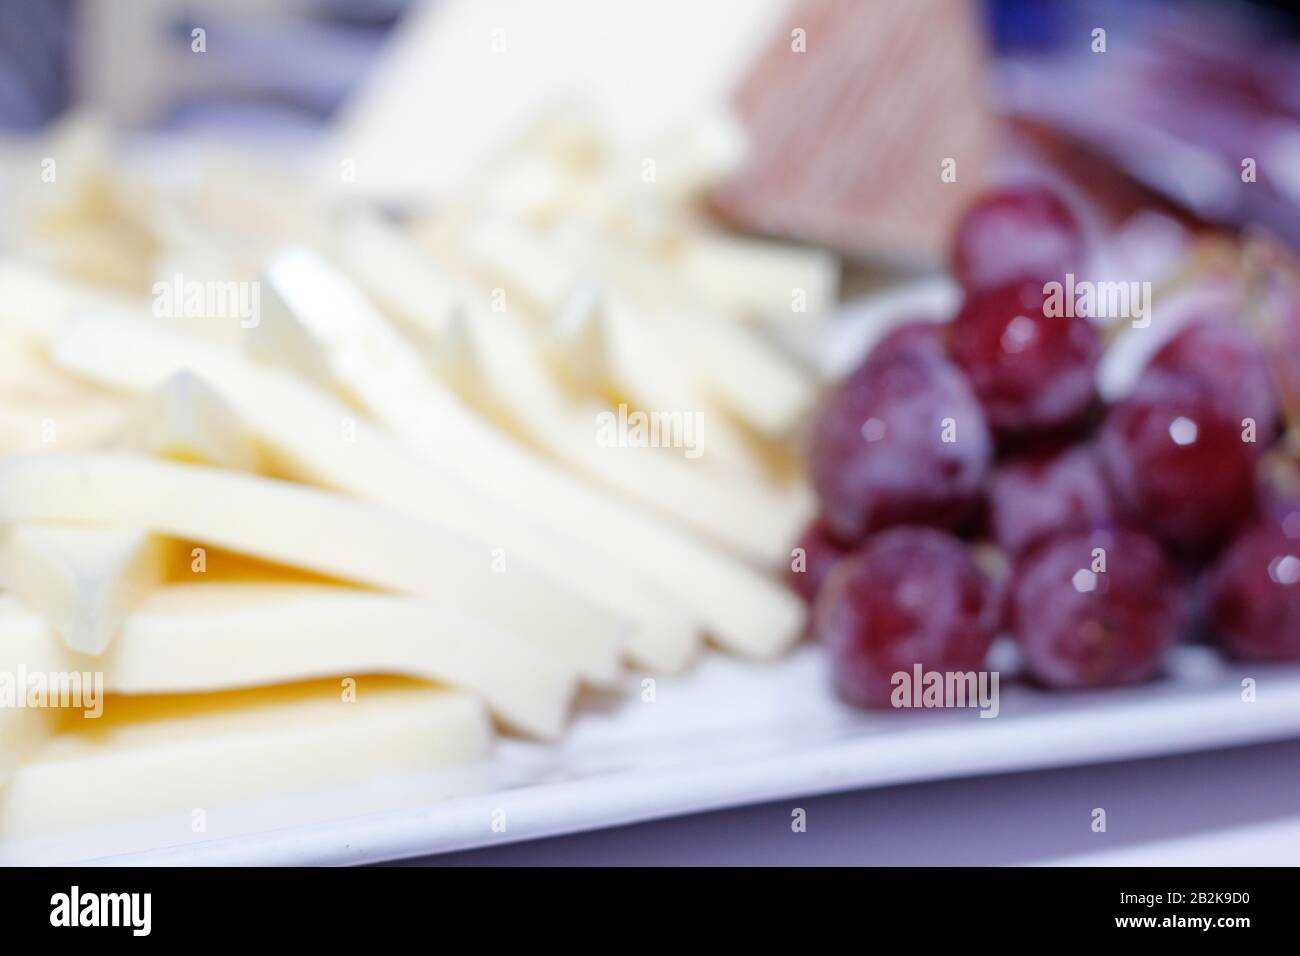 Trays full of slices of cheese served at the buffet Stock Photo